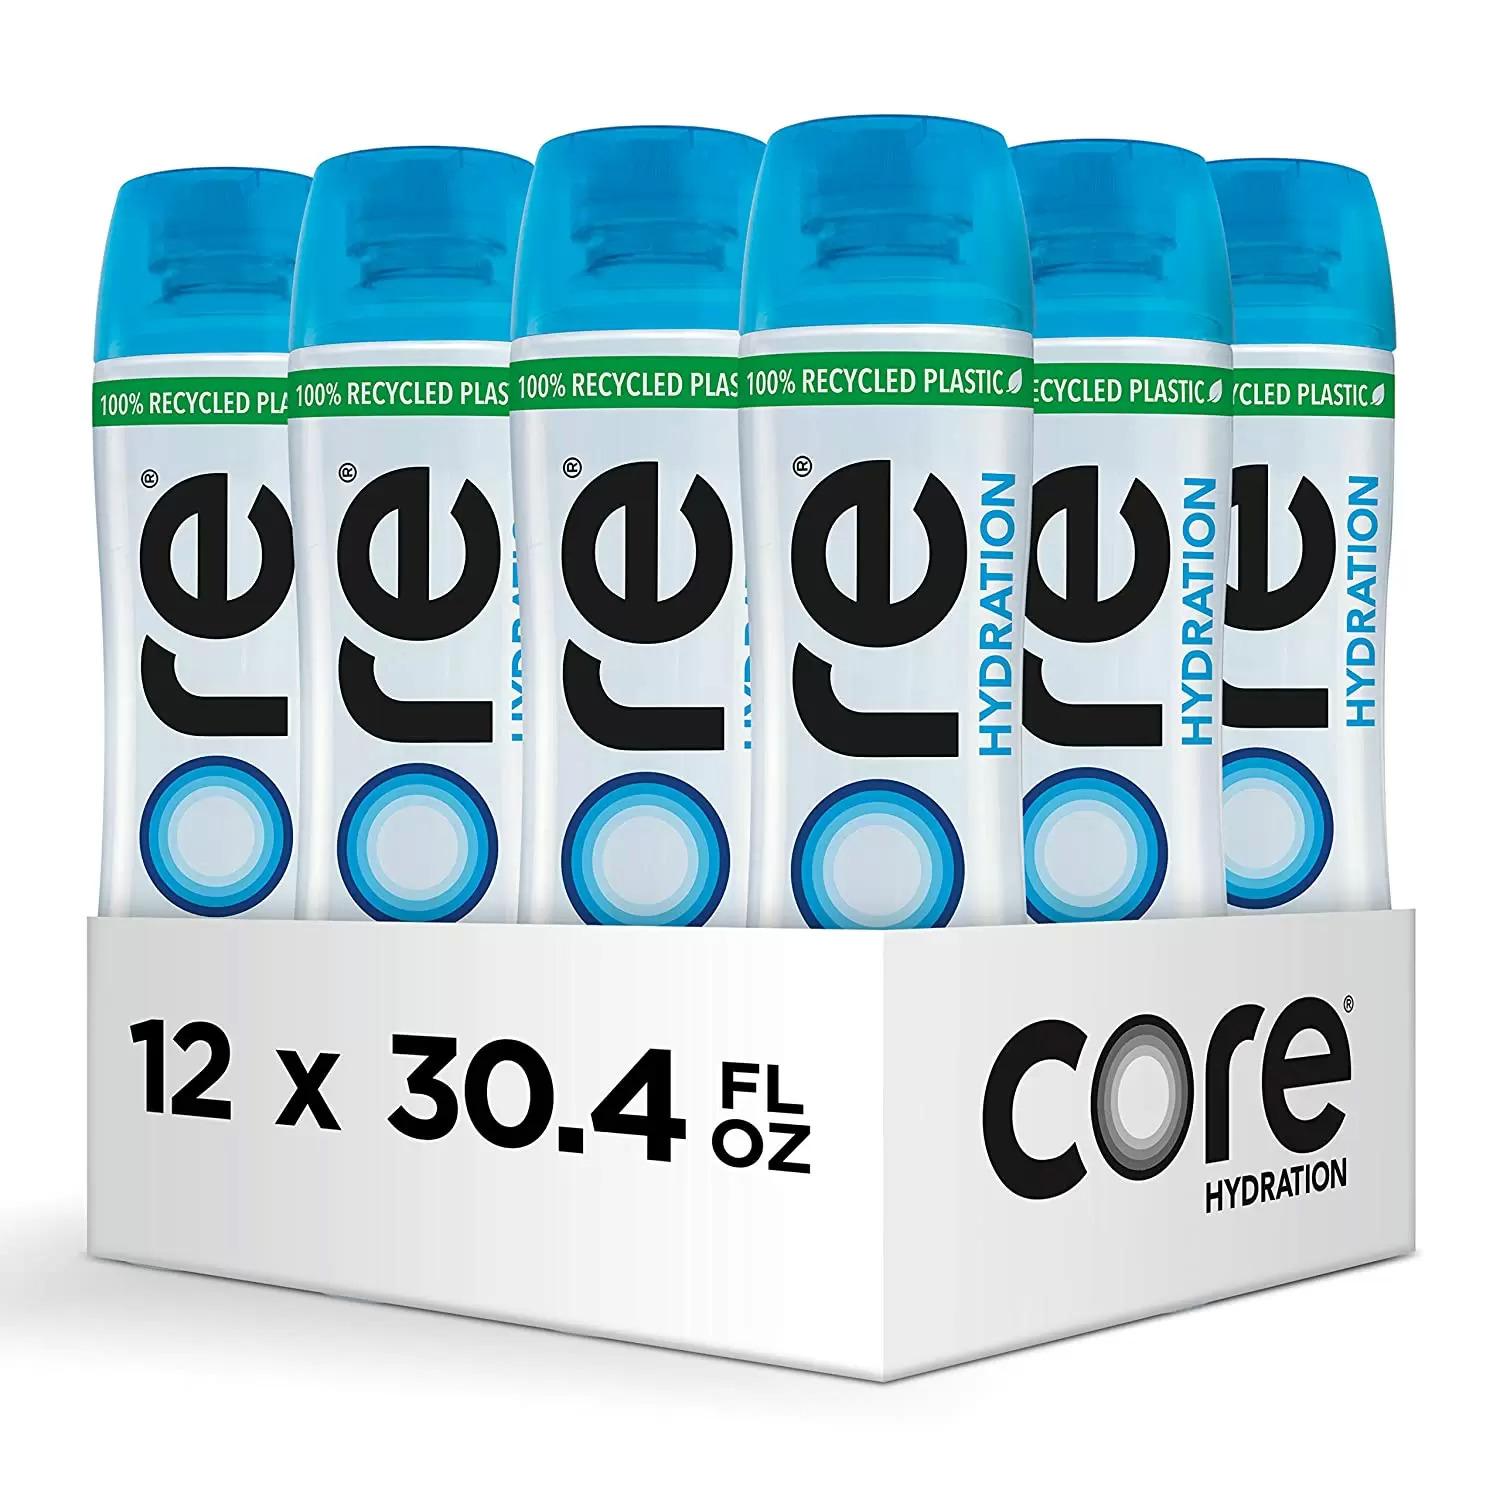 Core Hydration Enhanced Water 12 Pack for $11.40